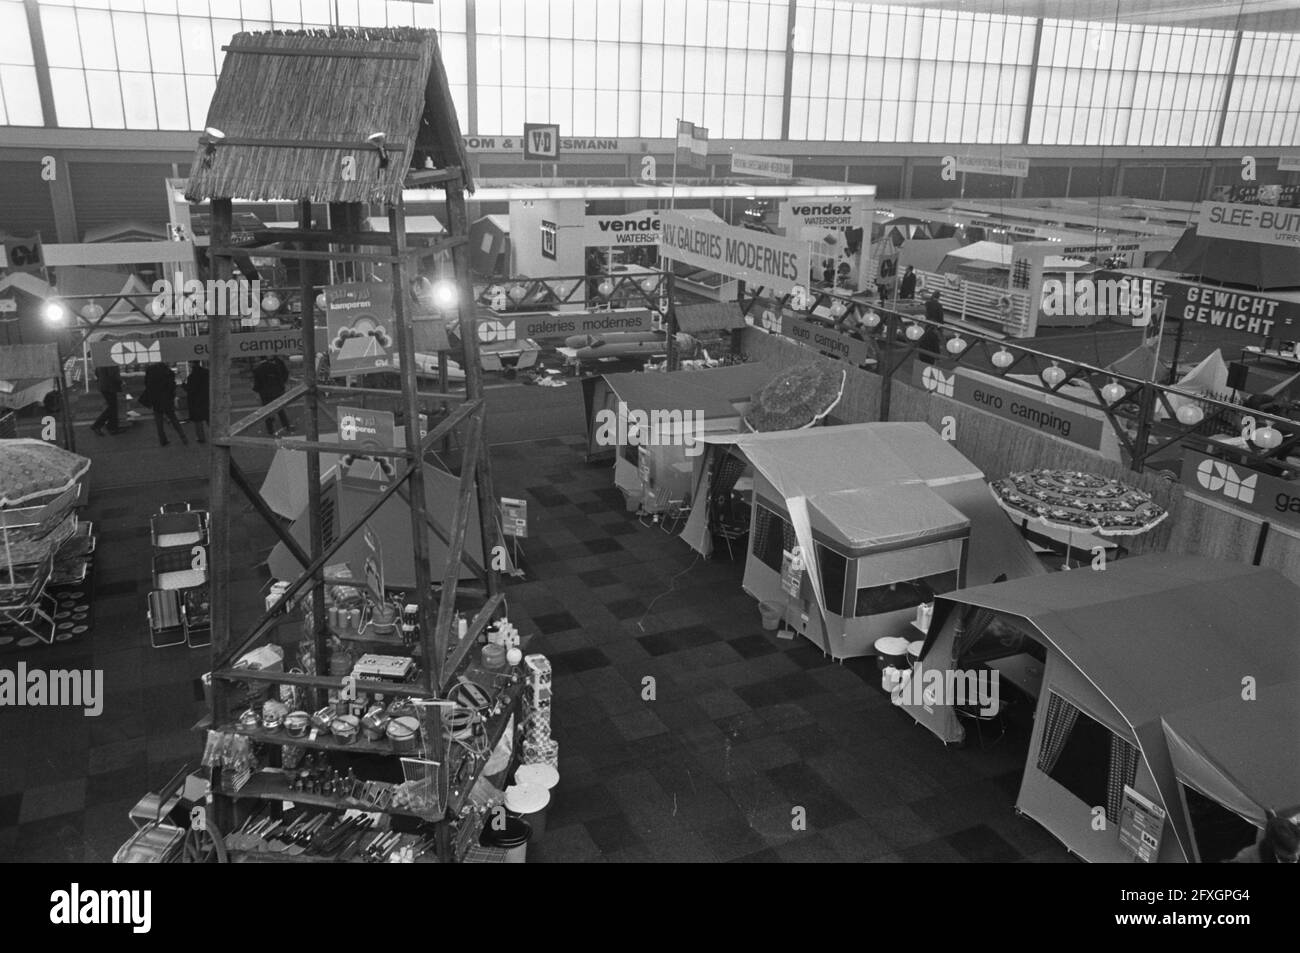 Fifteenth HISWA in RAI Amsterdam. Preparations. Overview tent exhibition, March 12, 1970, The Netherlands, 20th century press agency photo, news to remember, documentary, historic photography 1945-1990, visual stories, human history of the Twentieth Century, capturing moments in time Stock Photo